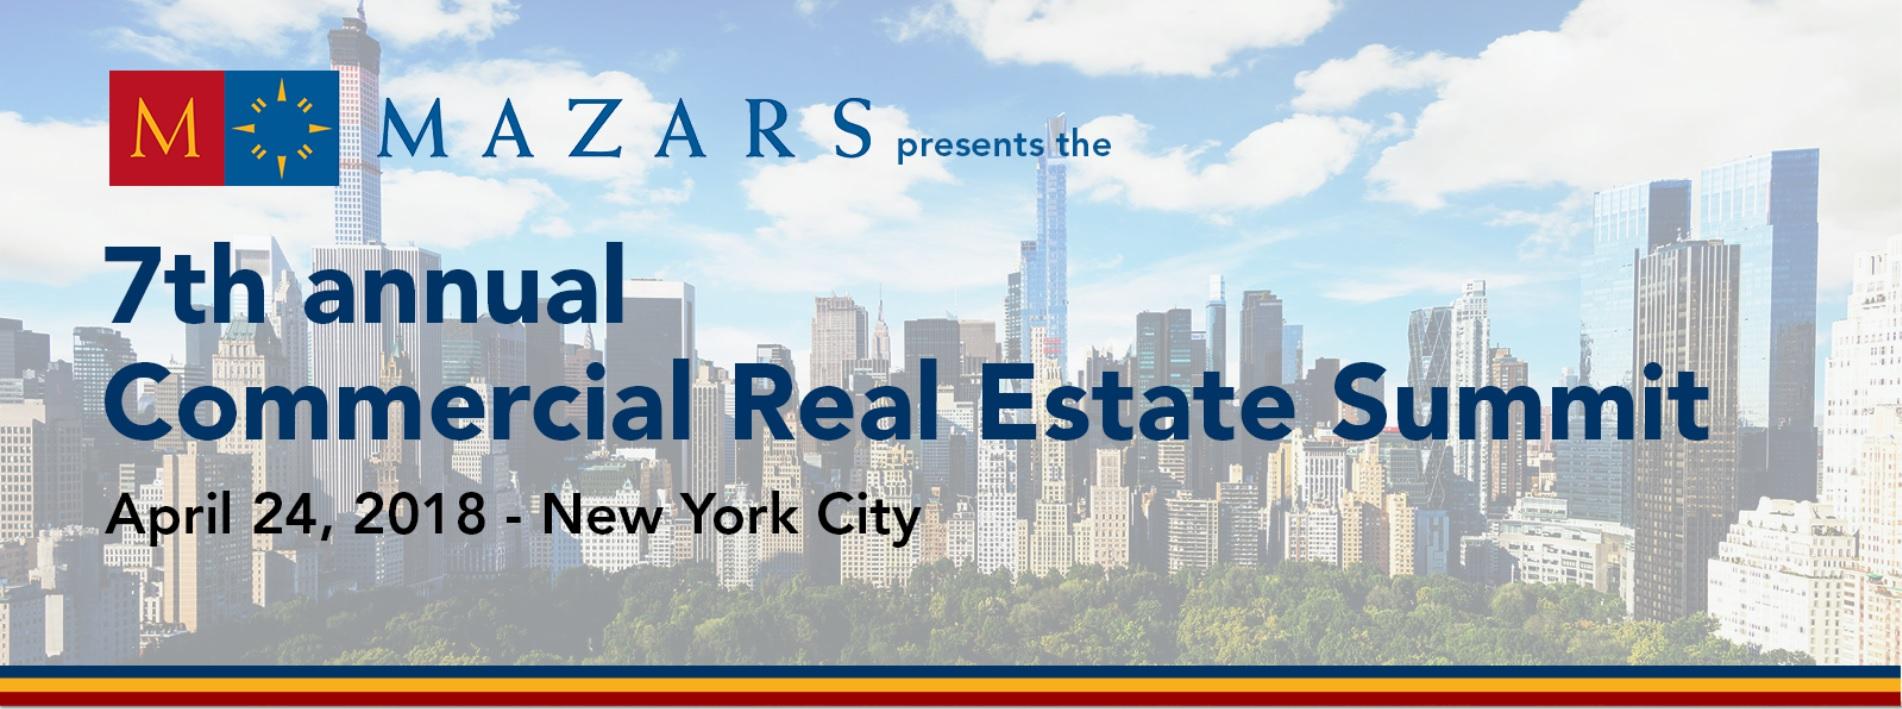 Mazars USA Holding Seventh Annual Commercial Real Estate Summit ...